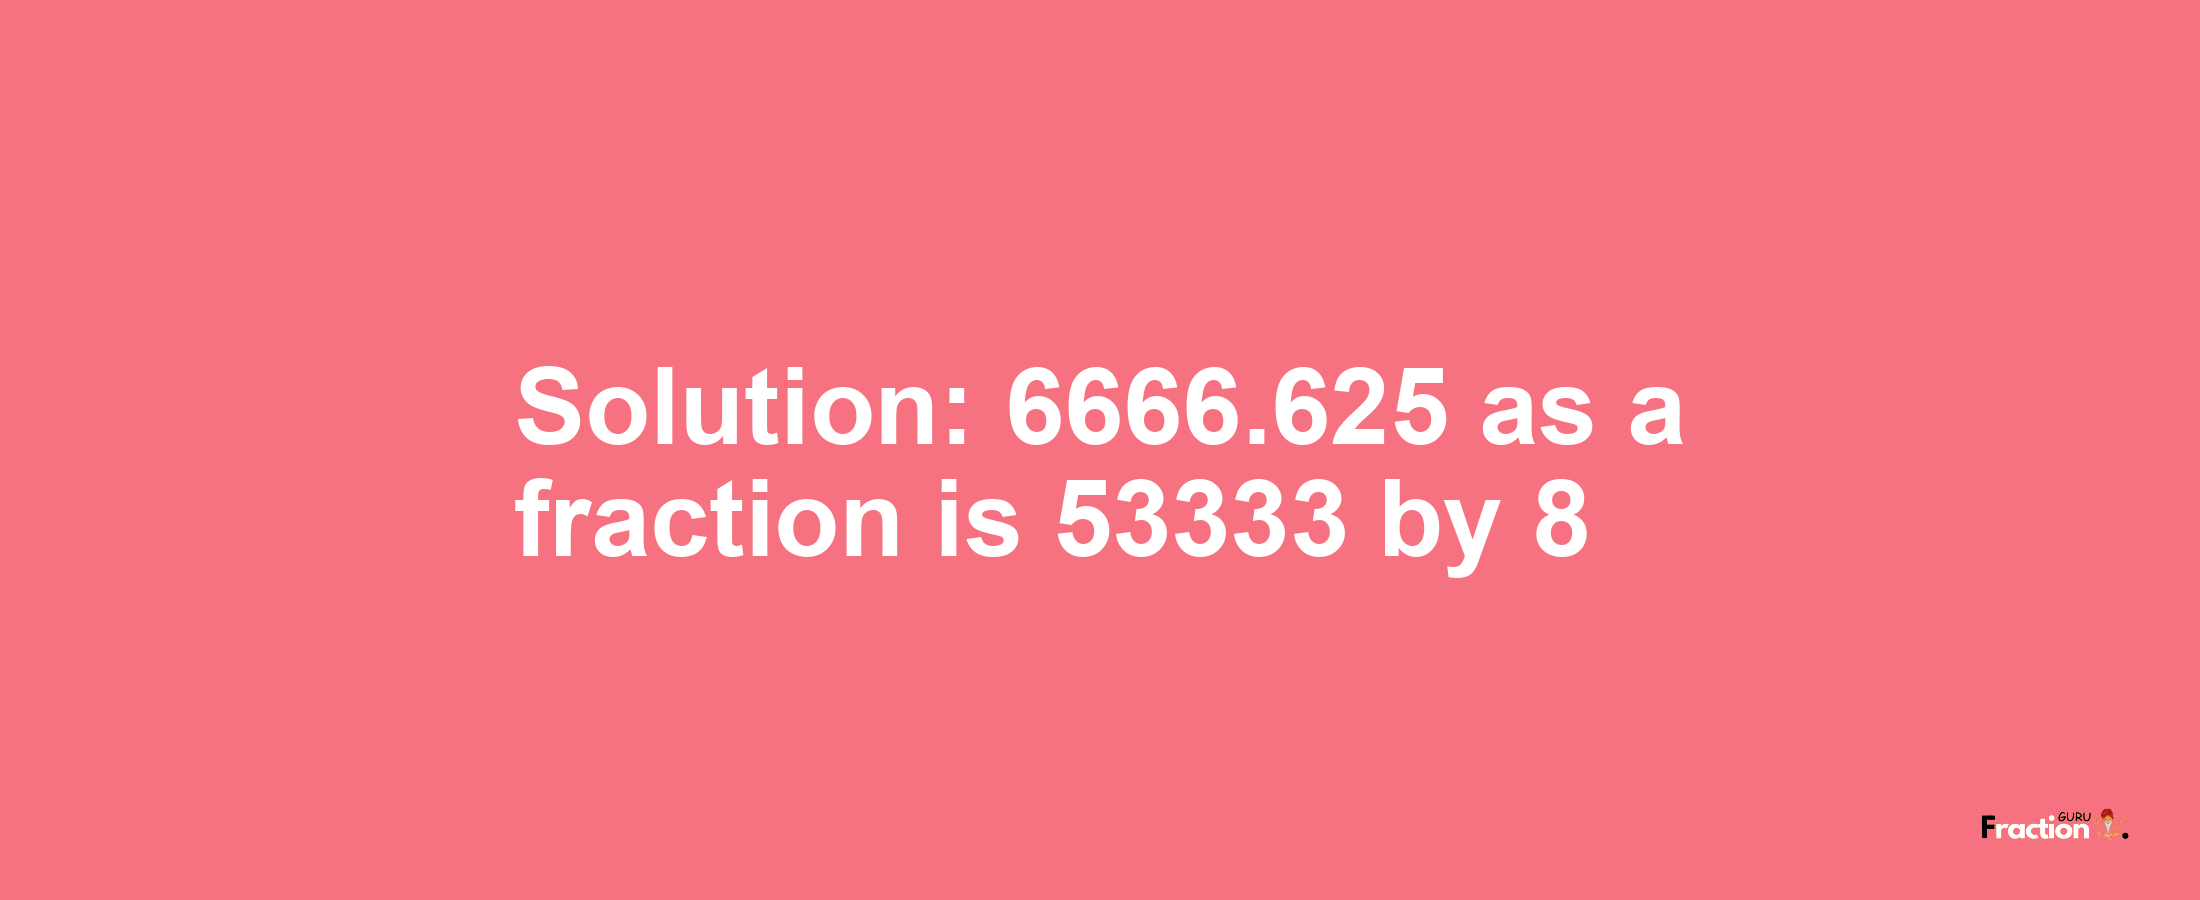 Solution:6666.625 as a fraction is 53333/8